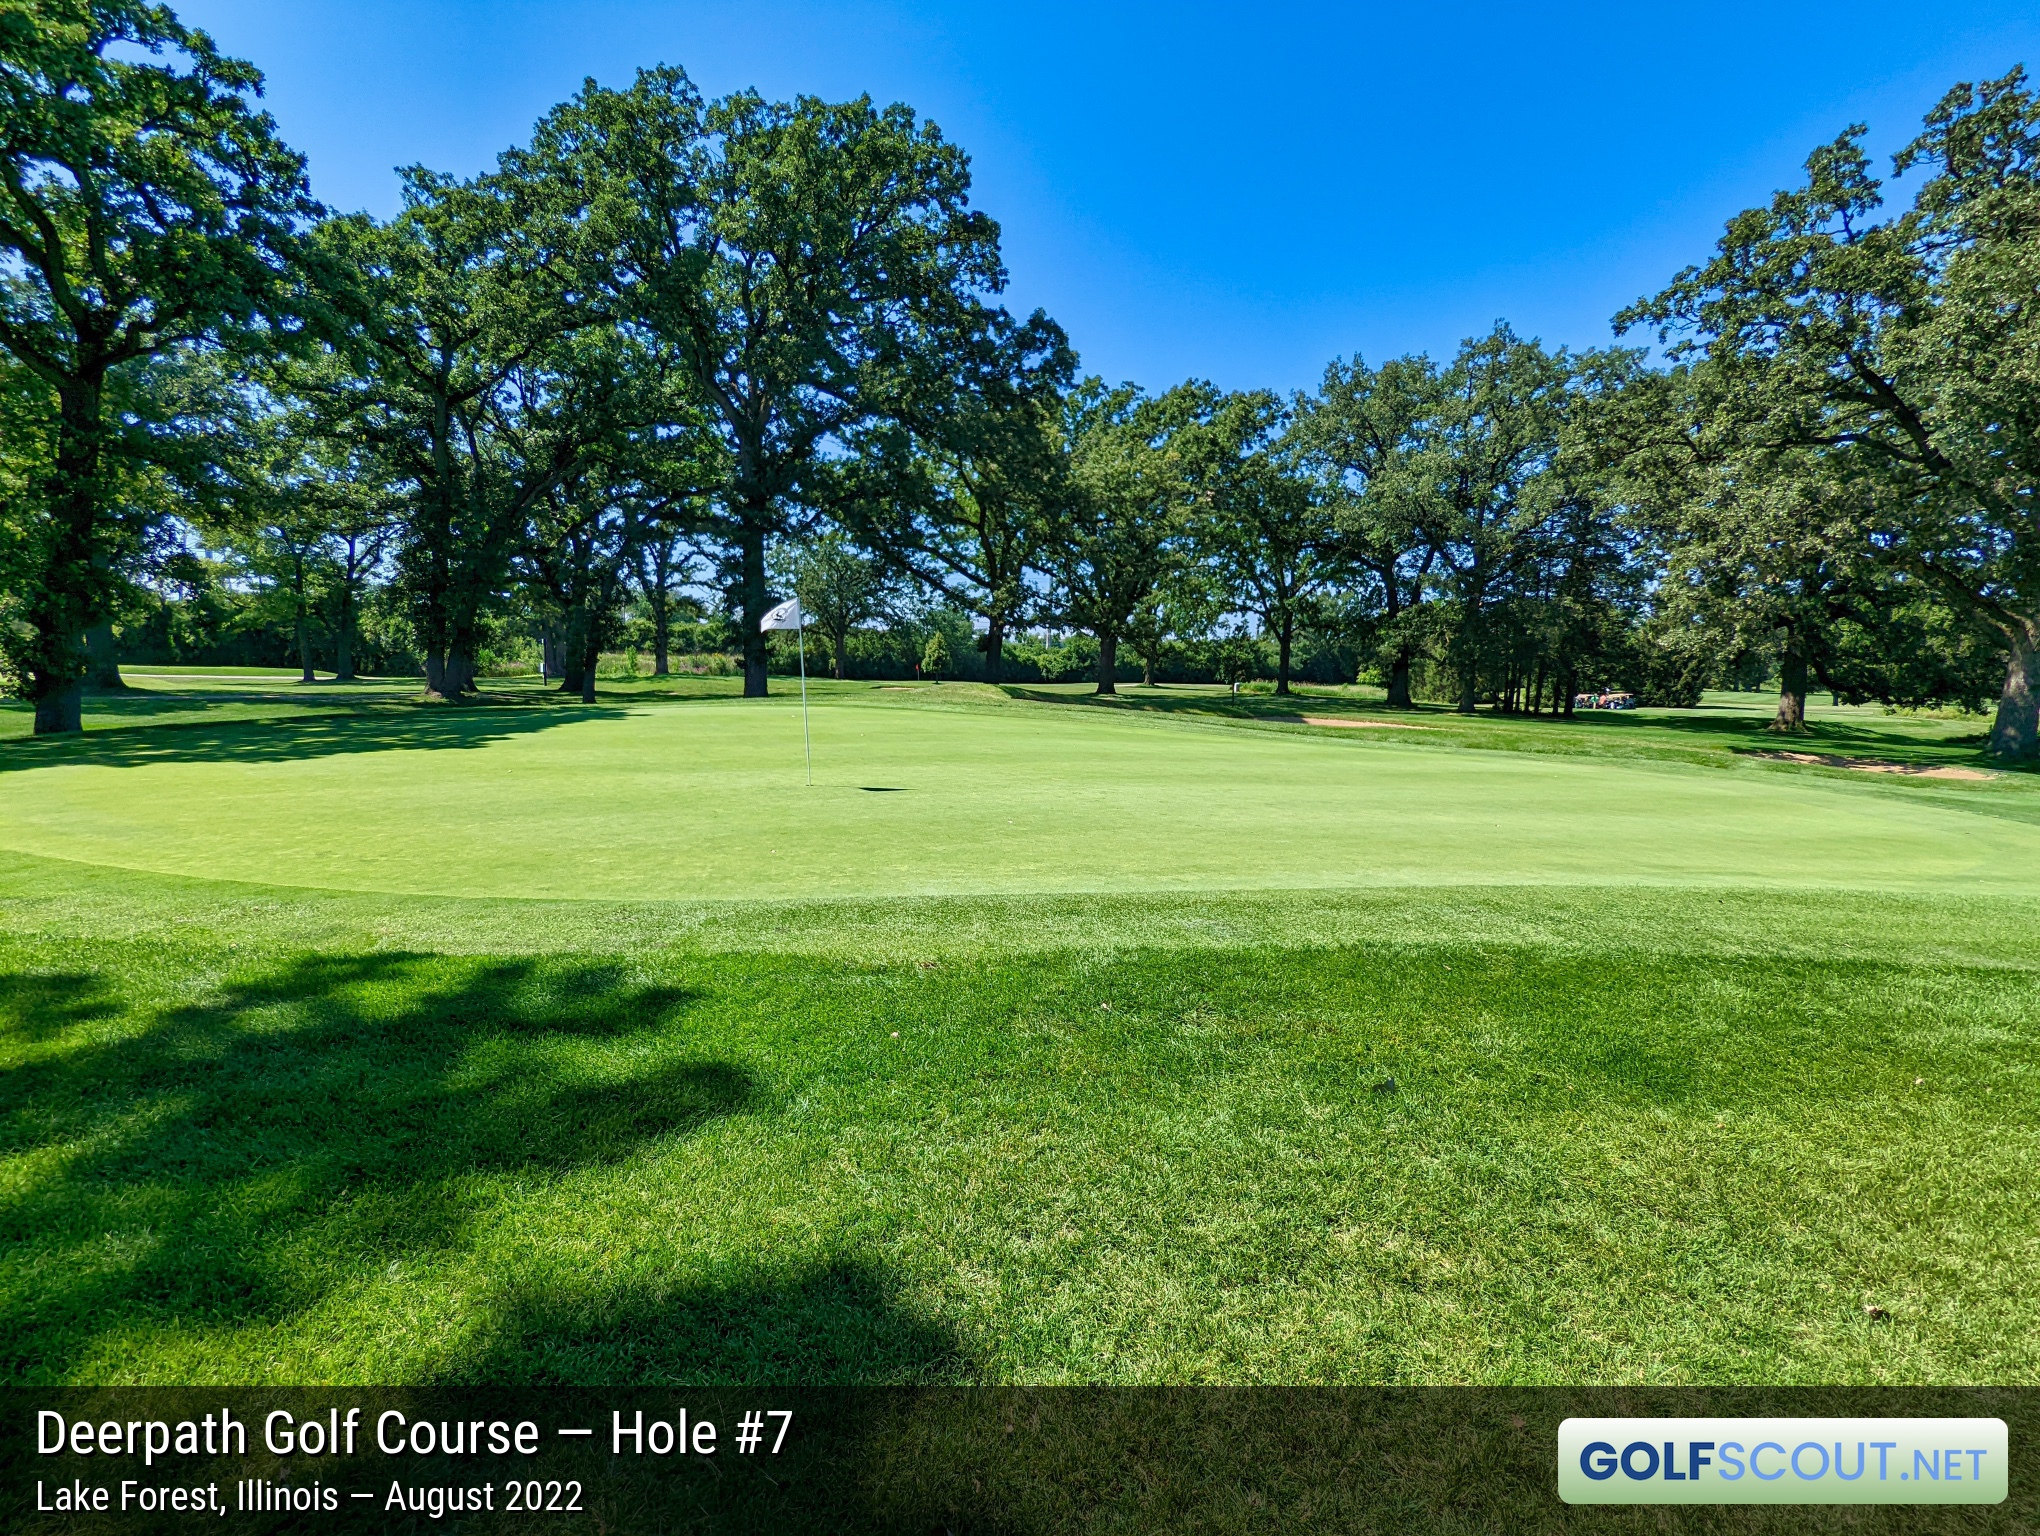 Photo of hole #7 at Deerpath Golf Course in Lake Forest, Illinois. 